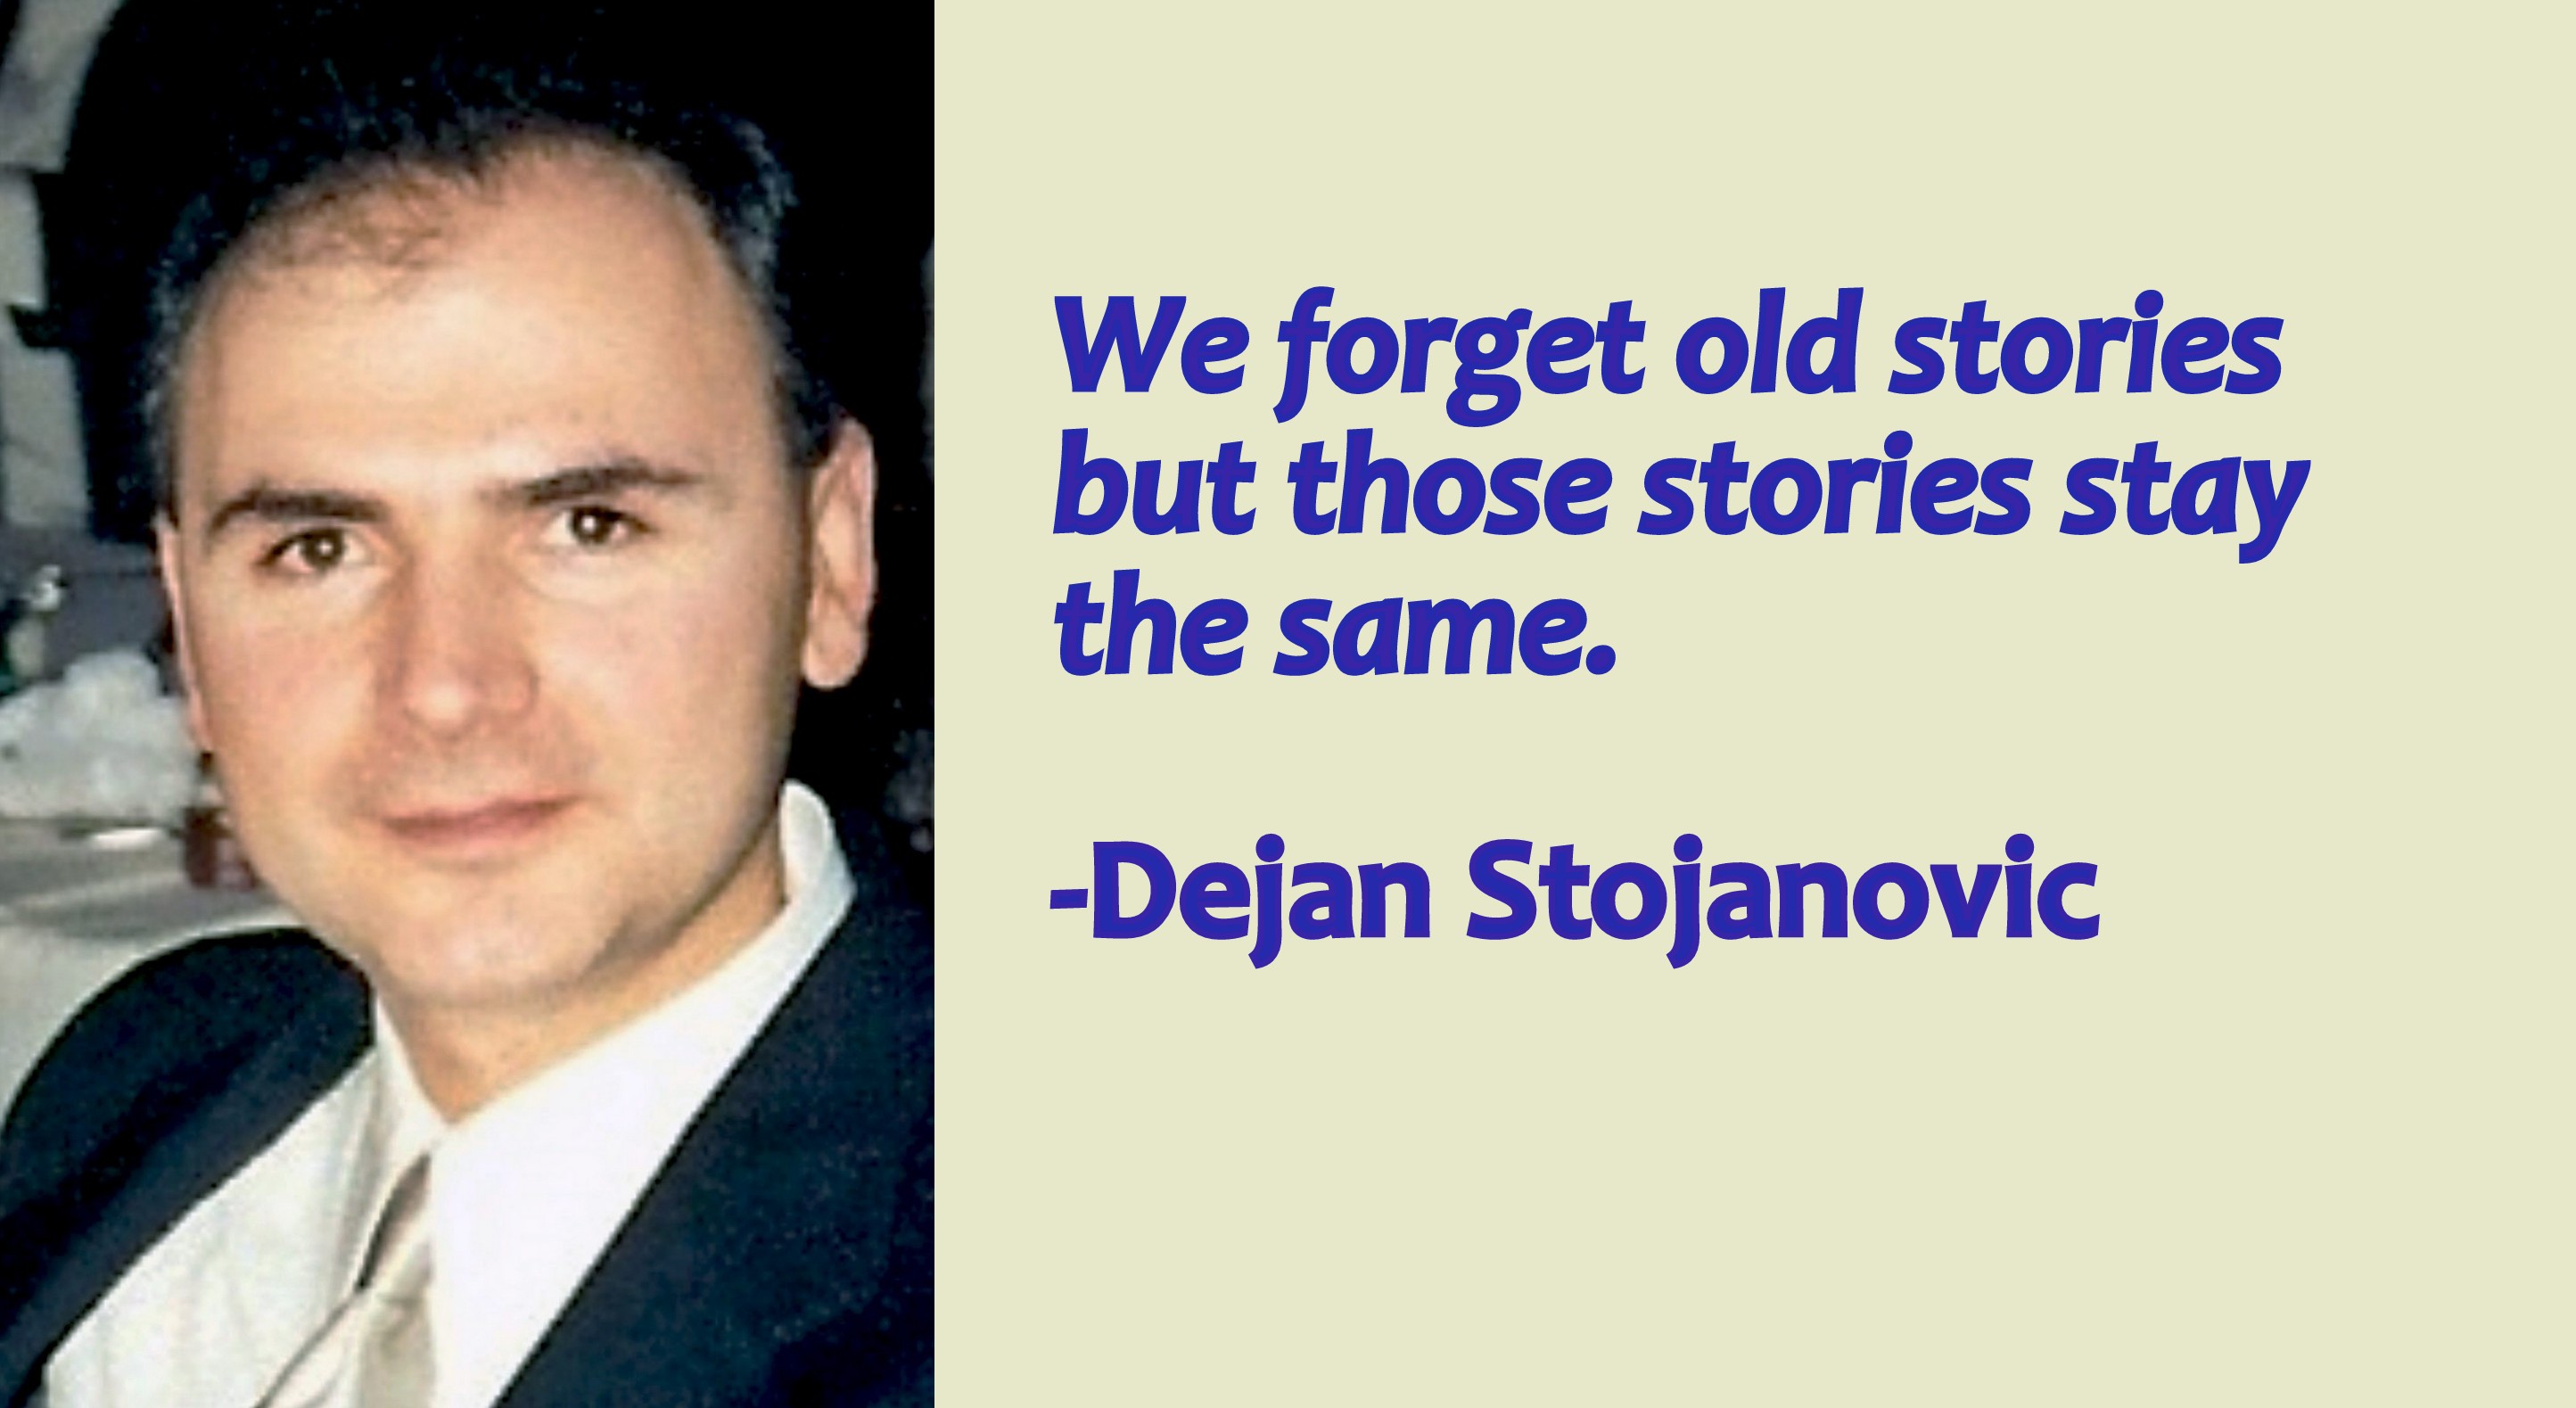 We forget old stories but those stories remain the same. -De